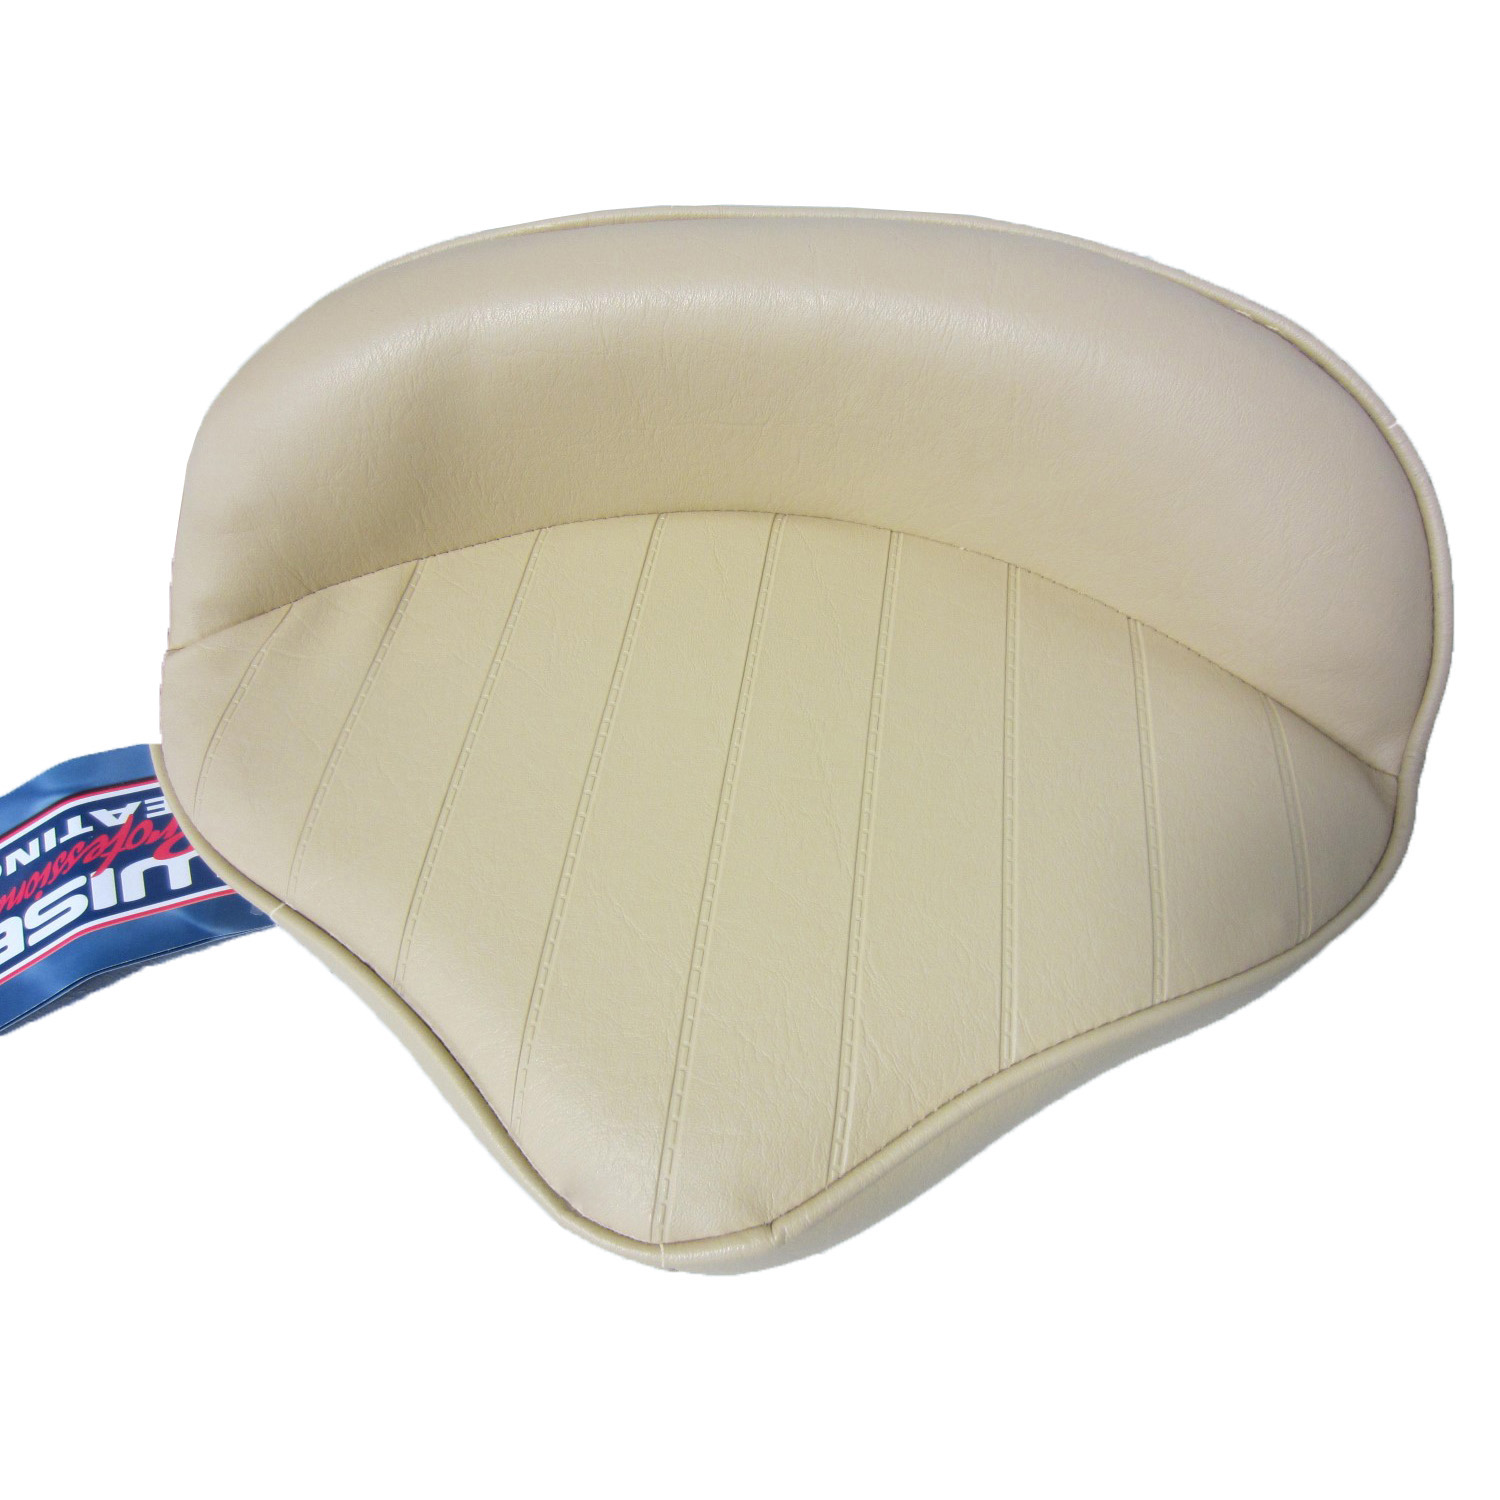 WISE NEW FISHING Pro Casting Seat Boat Bike Butt Chair TAN/SAND